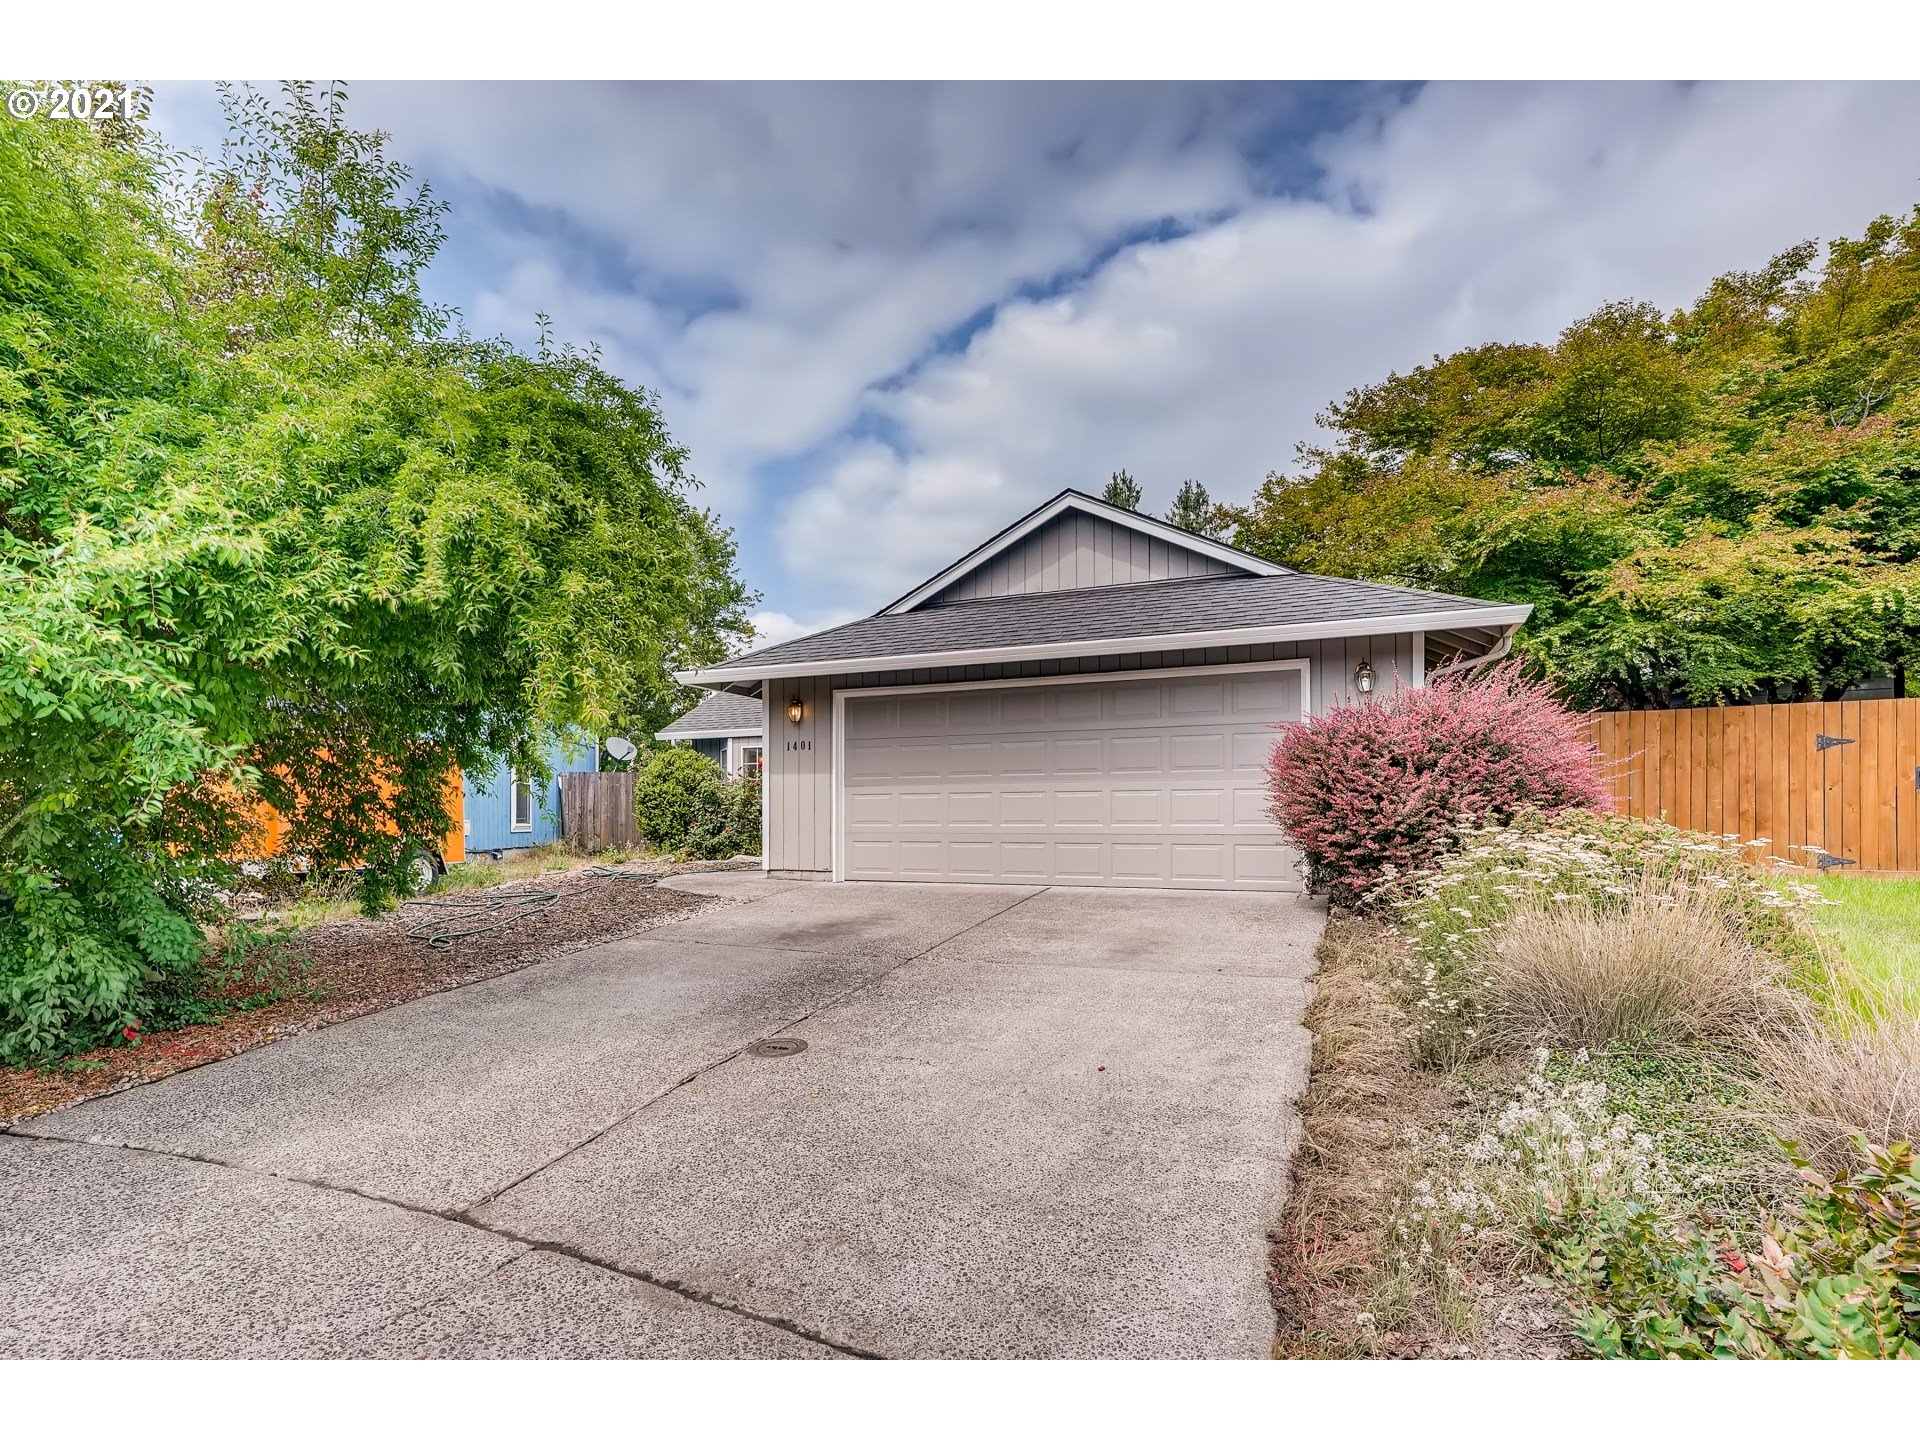 1401 SE 159TH AVE (1 of 30)